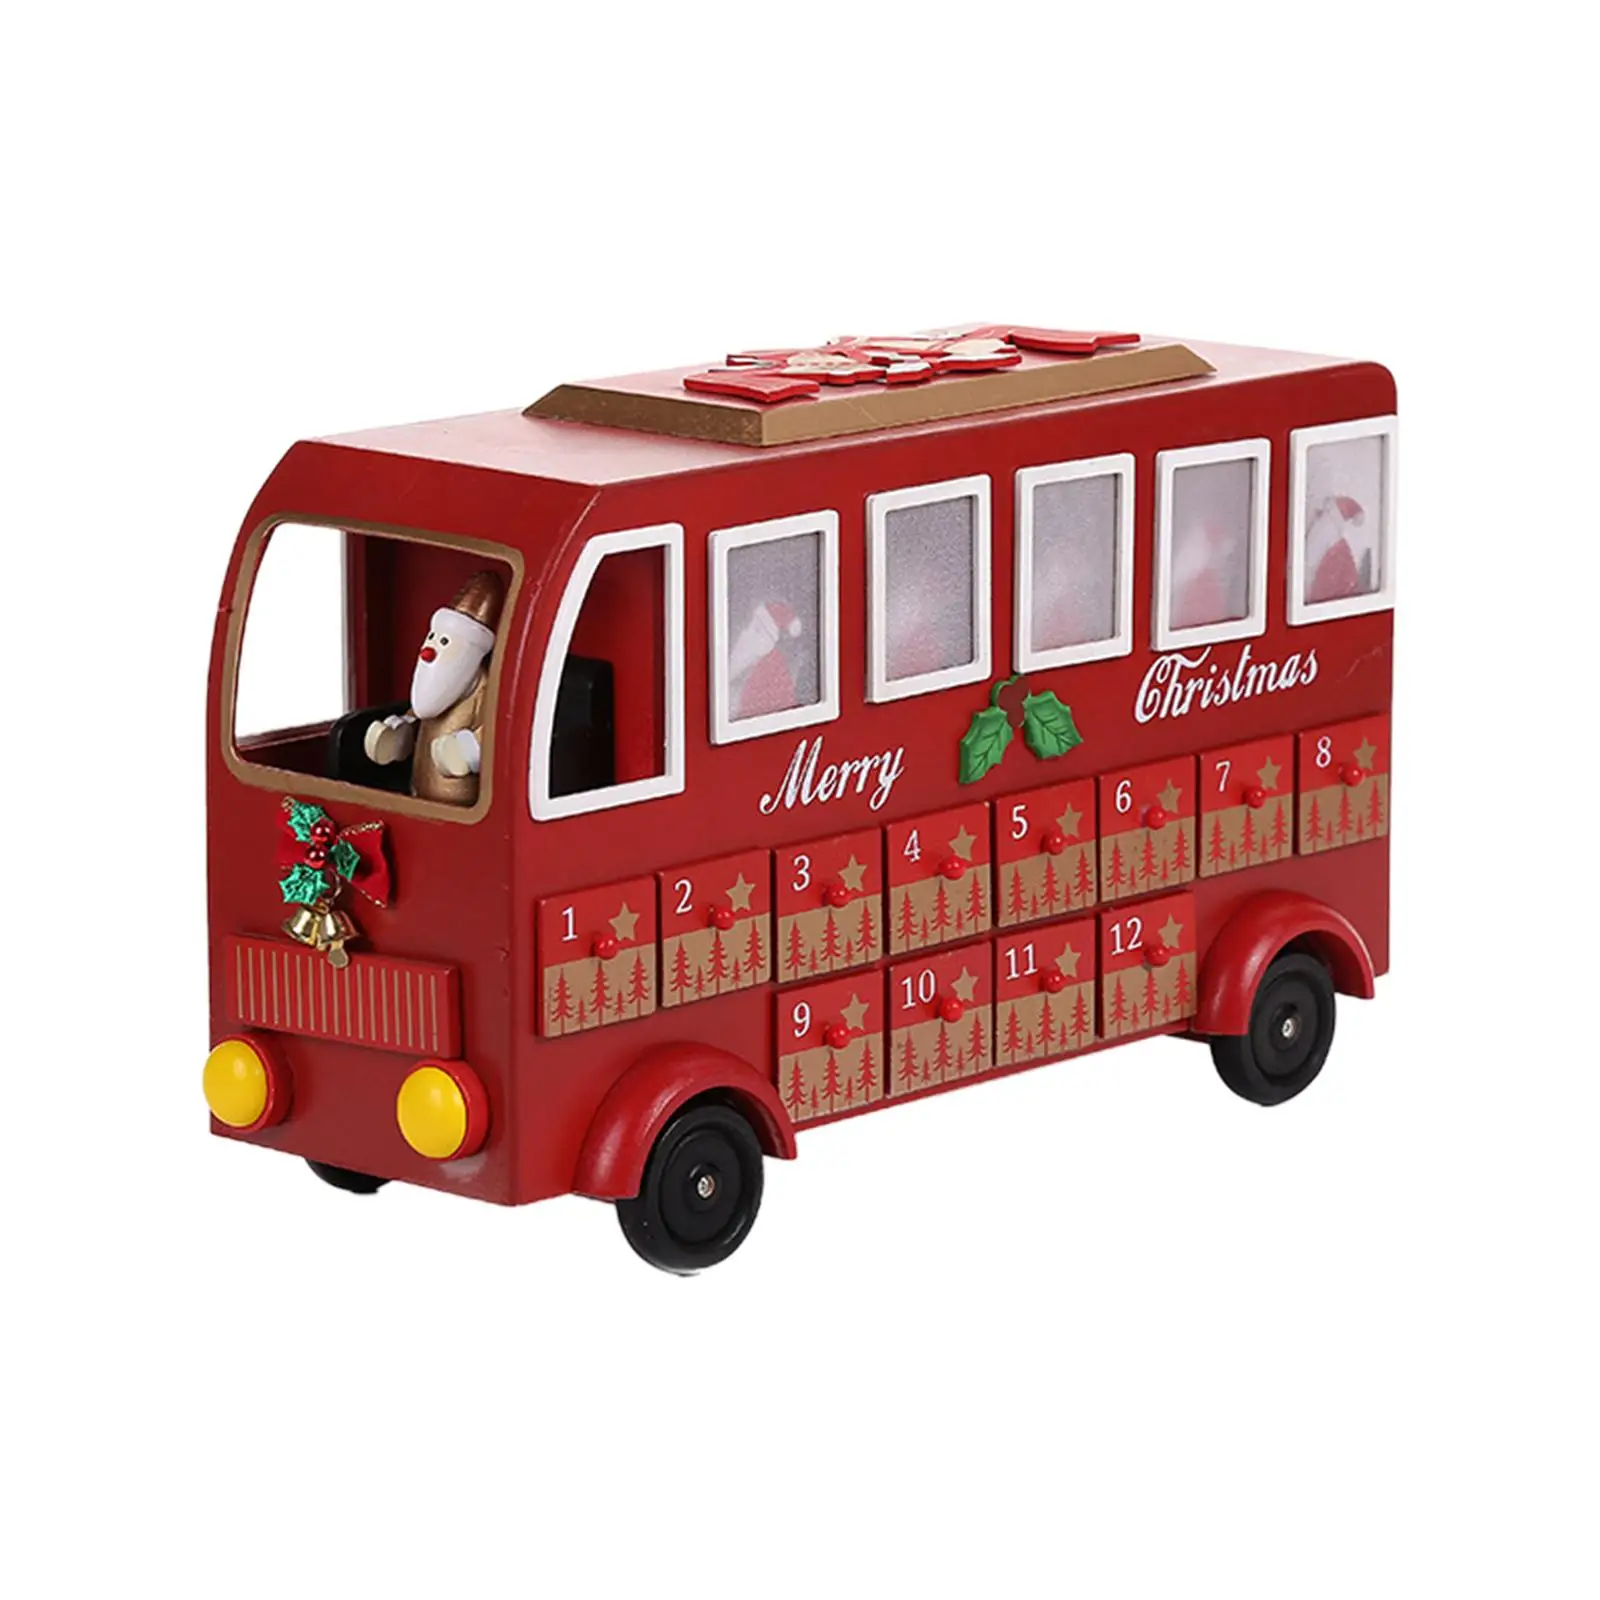 Table Christmas Wooden Advent Calendar Bus 24 Day Count Down Xmas Decor with 24 Drawer Durable Wood Material Festive